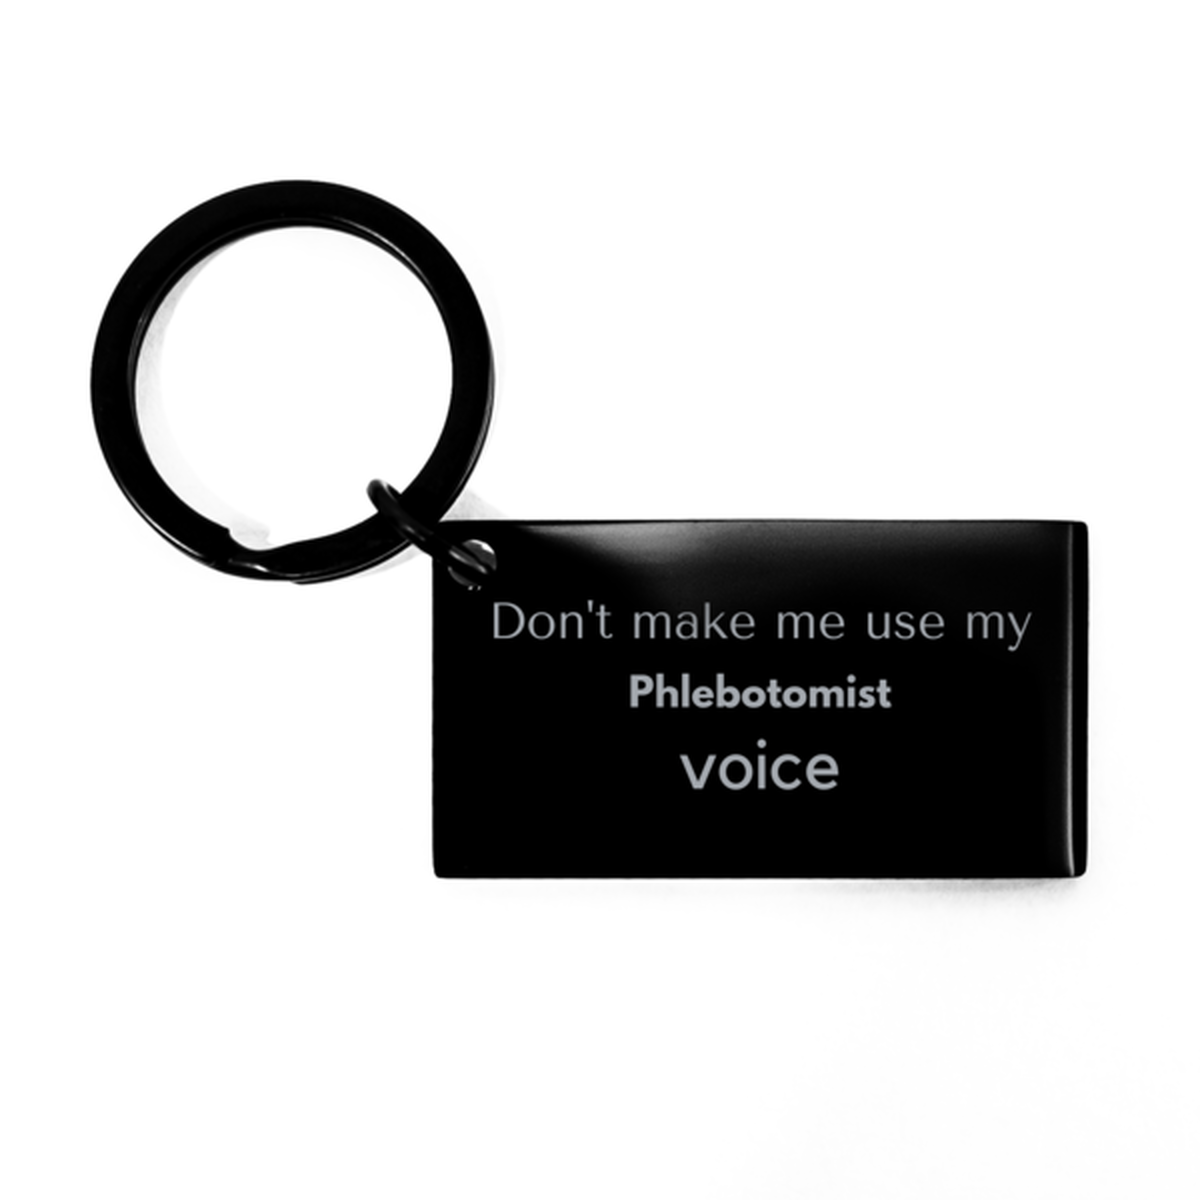 Don't make me use my Phlebotomist voice, Sarcasm Phlebotomist Gifts, Christmas Phlebotomist Keychain Birthday Unique Gifts For Phlebotomist Coworkers, Men, Women, Colleague, Friends